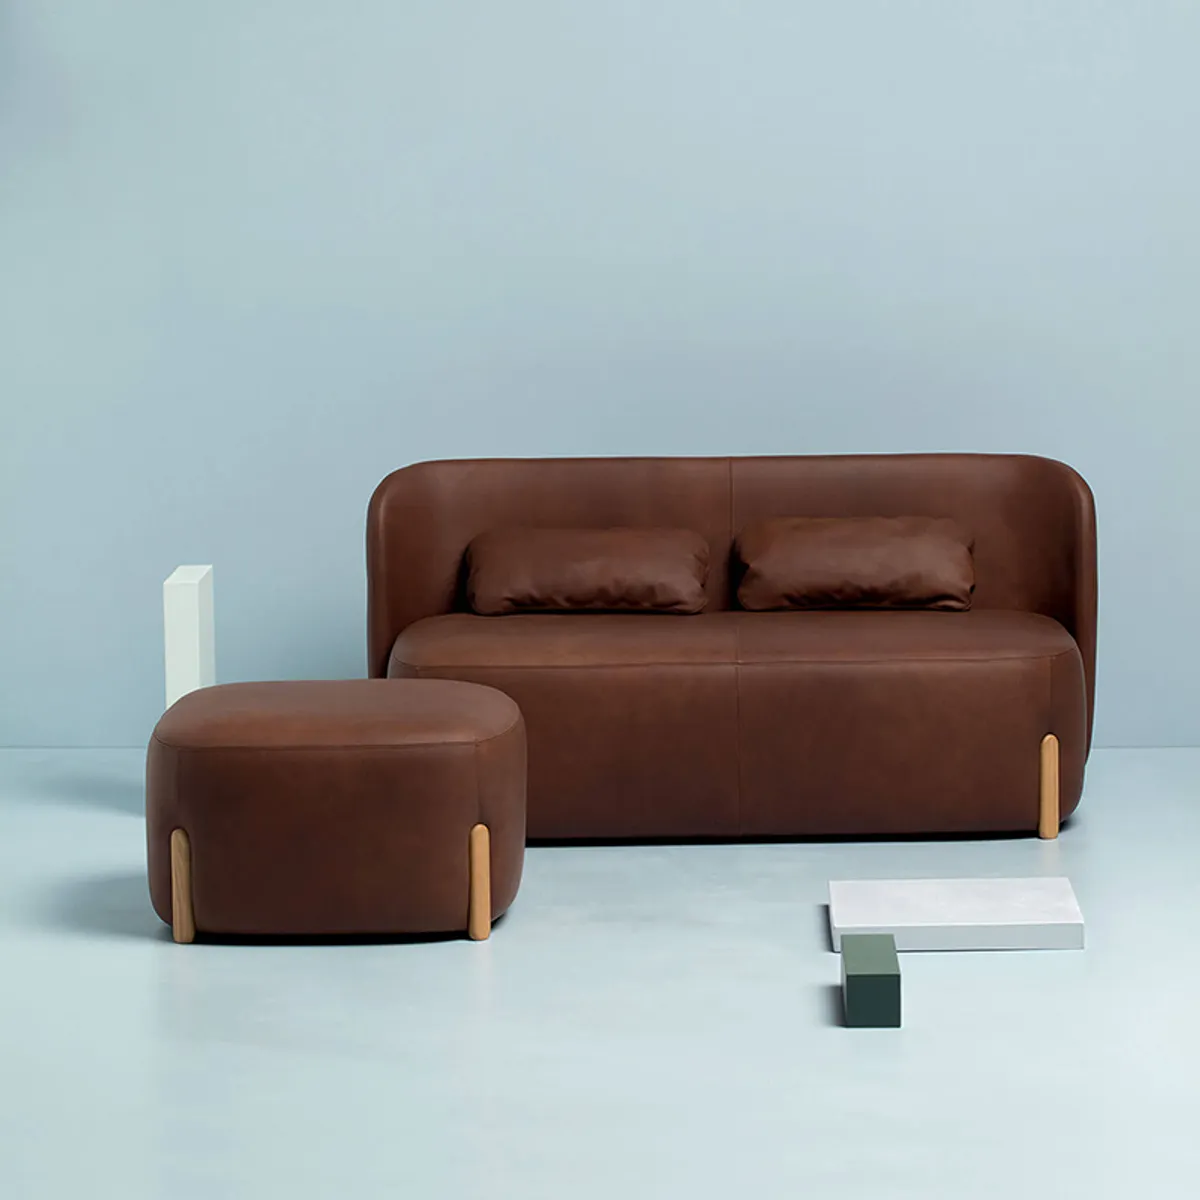 Hyppo Sofa And Stool Inside Out Contracts